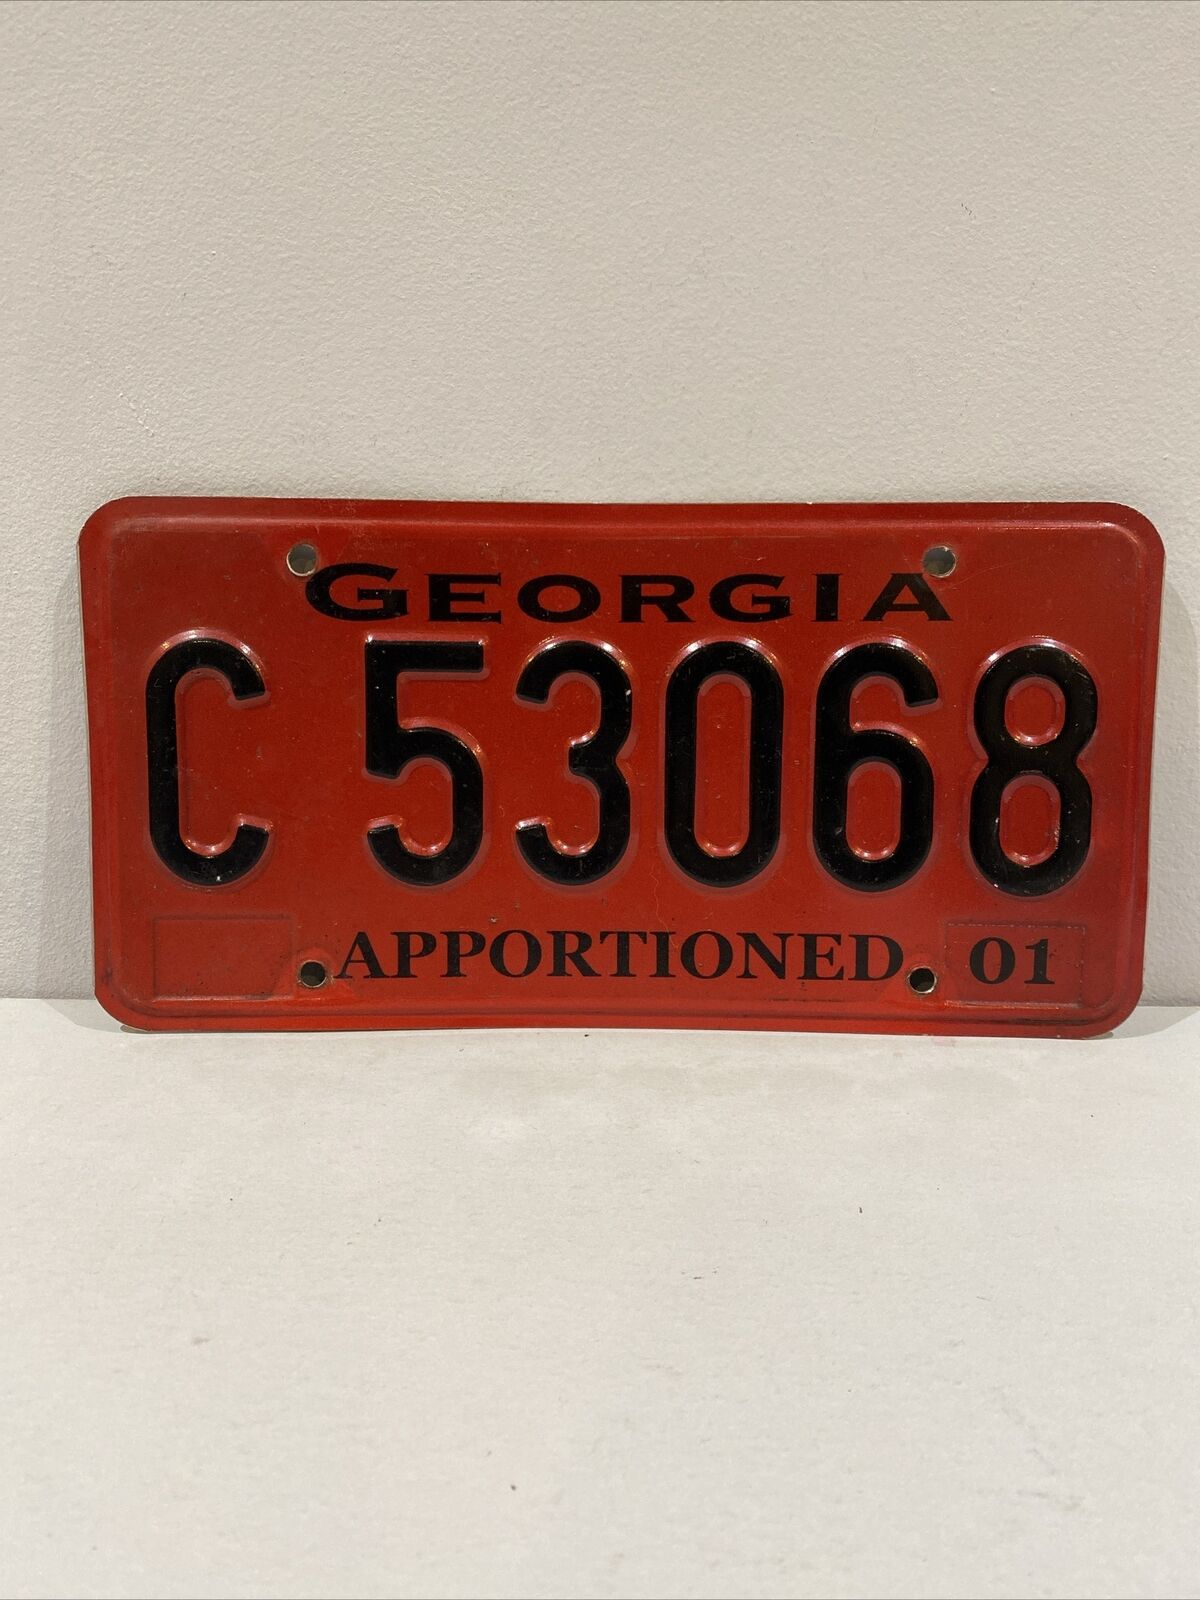 Vintage 2001 Georgia Expired APPORTIONED License Plate ~ C 53068 ~ Embossed